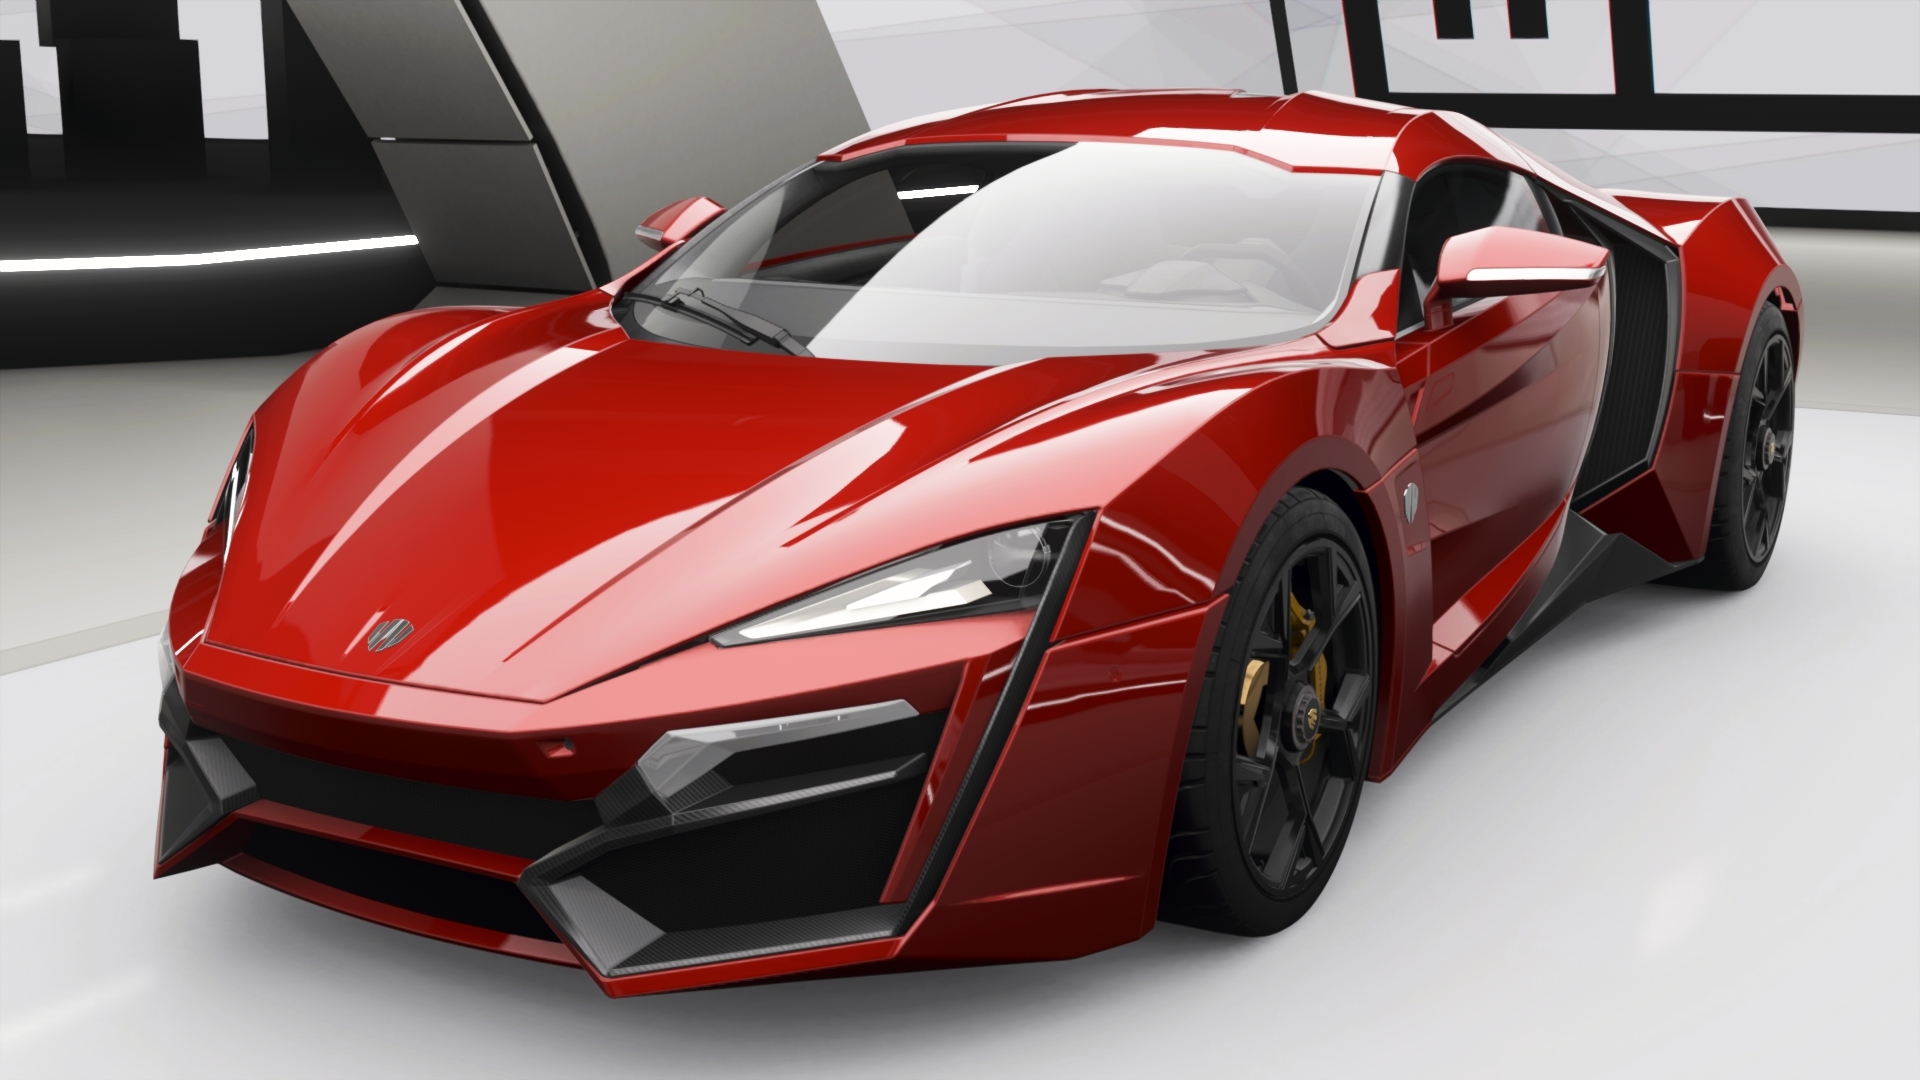 Top 20 Most Expensive Cars In The World 2021/2022